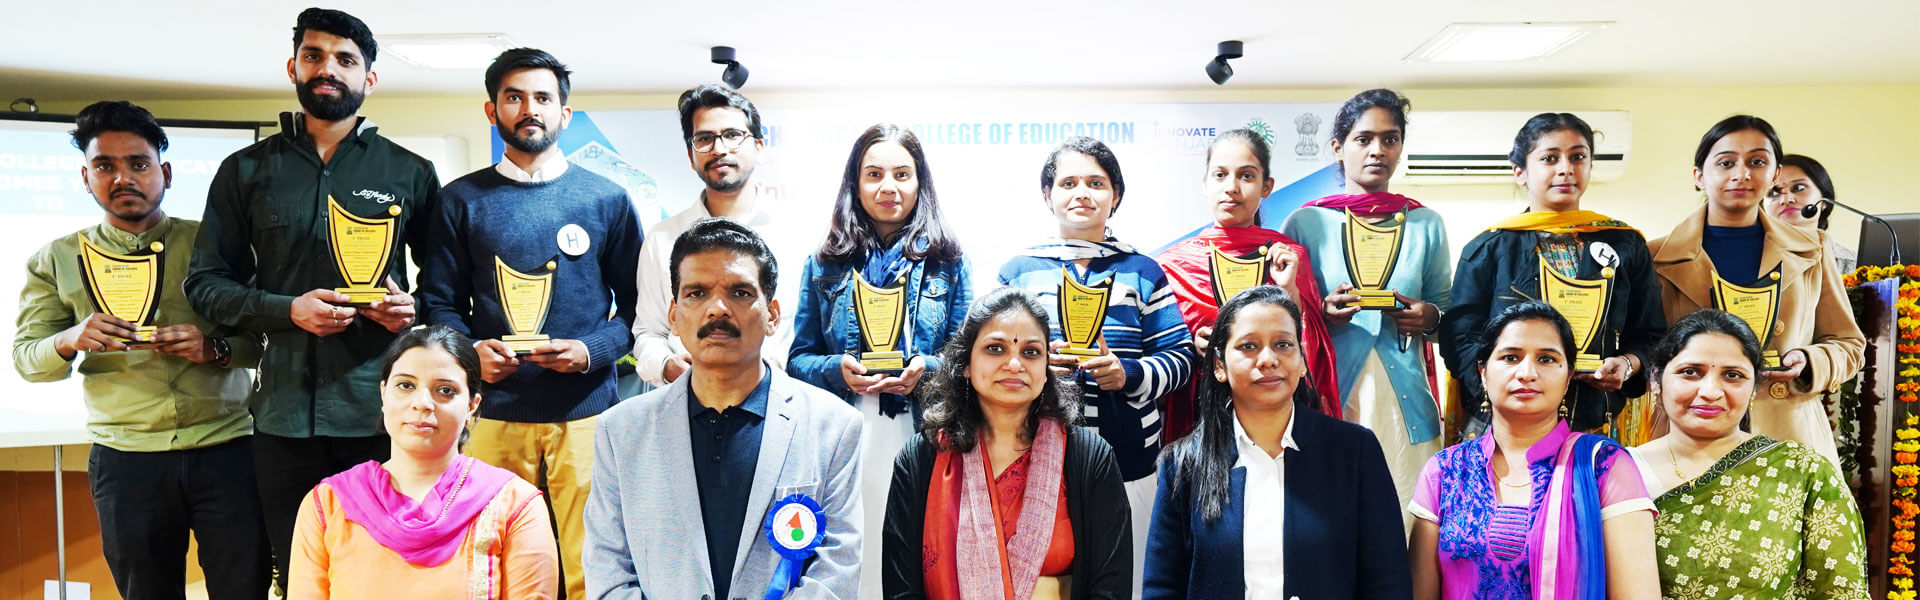 Chandigarh College of Education, in association with Punjab State Council for Science and Technology and NCSTC, organized Inter-College Competition. 